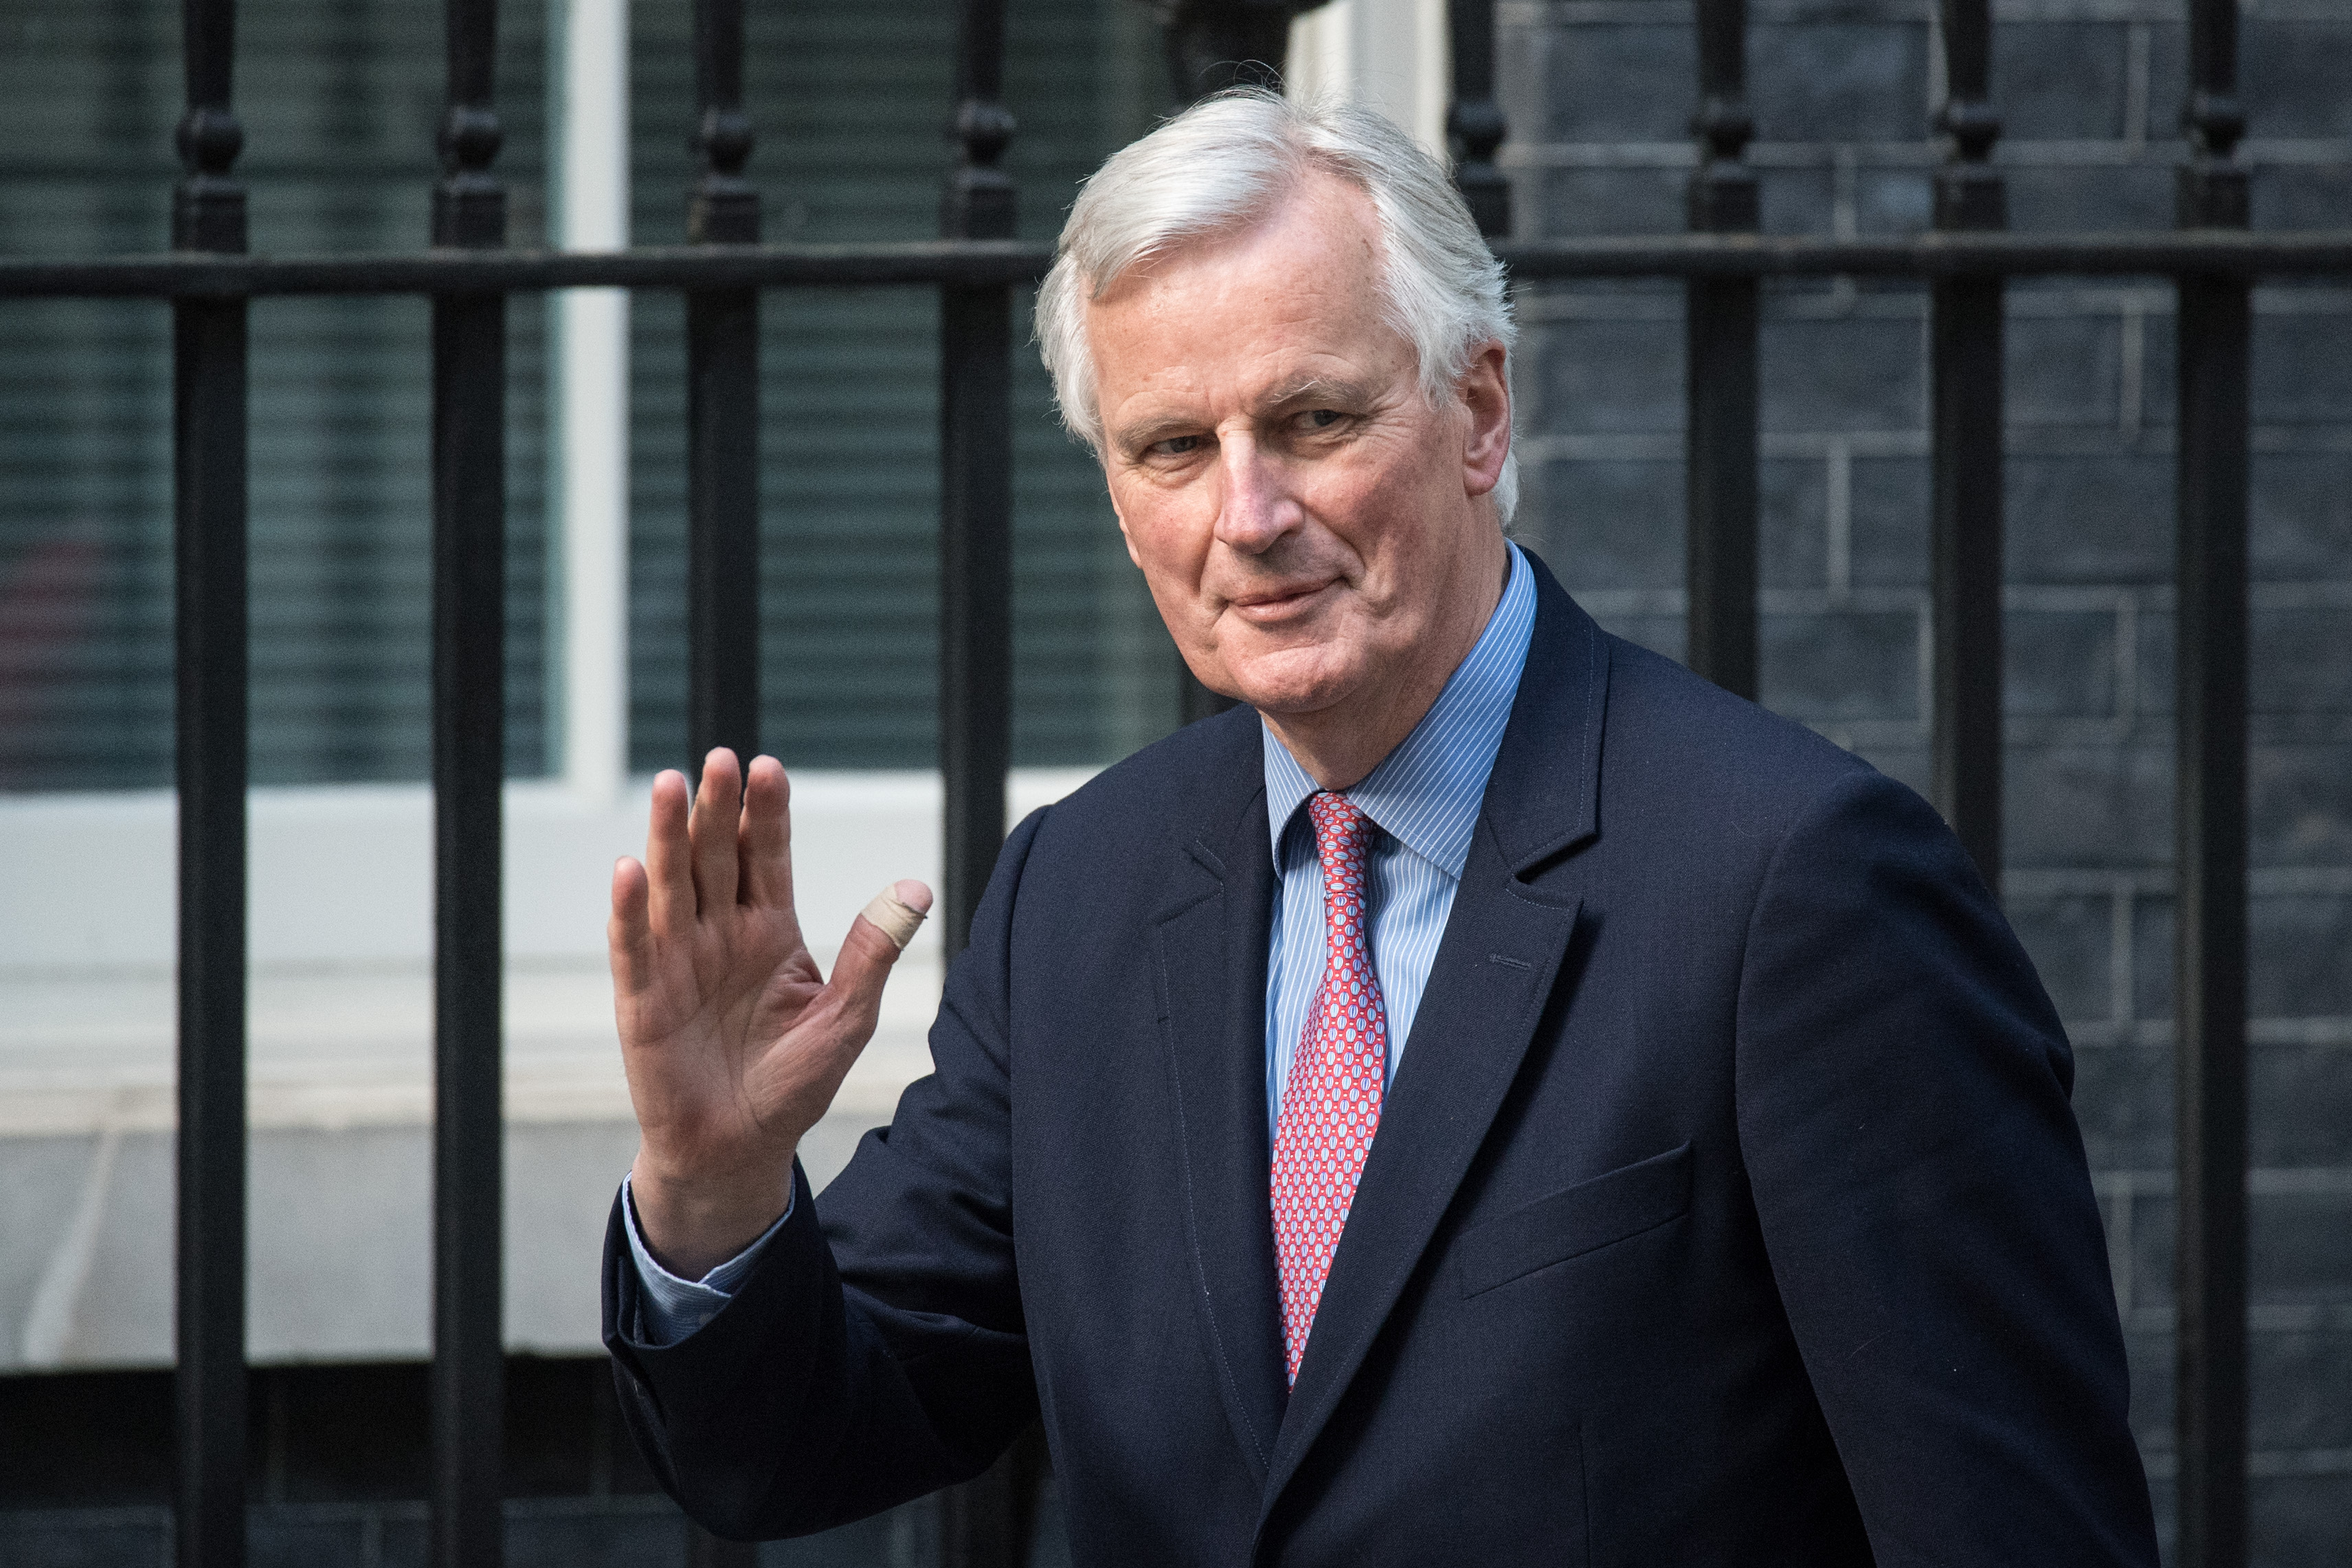 LONDON, ENGLAND - APRIL 26: European Union's chief Brexit negotiator, Michel Barnier, arrives with European Commission president, Jean-Claude Juncker, to meet Britain's Prime Minister, Theresa May on April 26, 2017 in Downing Street, London, England. Prime Minister May is to hold her first major talks with E.U leaders since calling a general election in a bid to strengthen her position in forthcoming Brexit negotiations. (Photo by Carl Court/Getty Images)